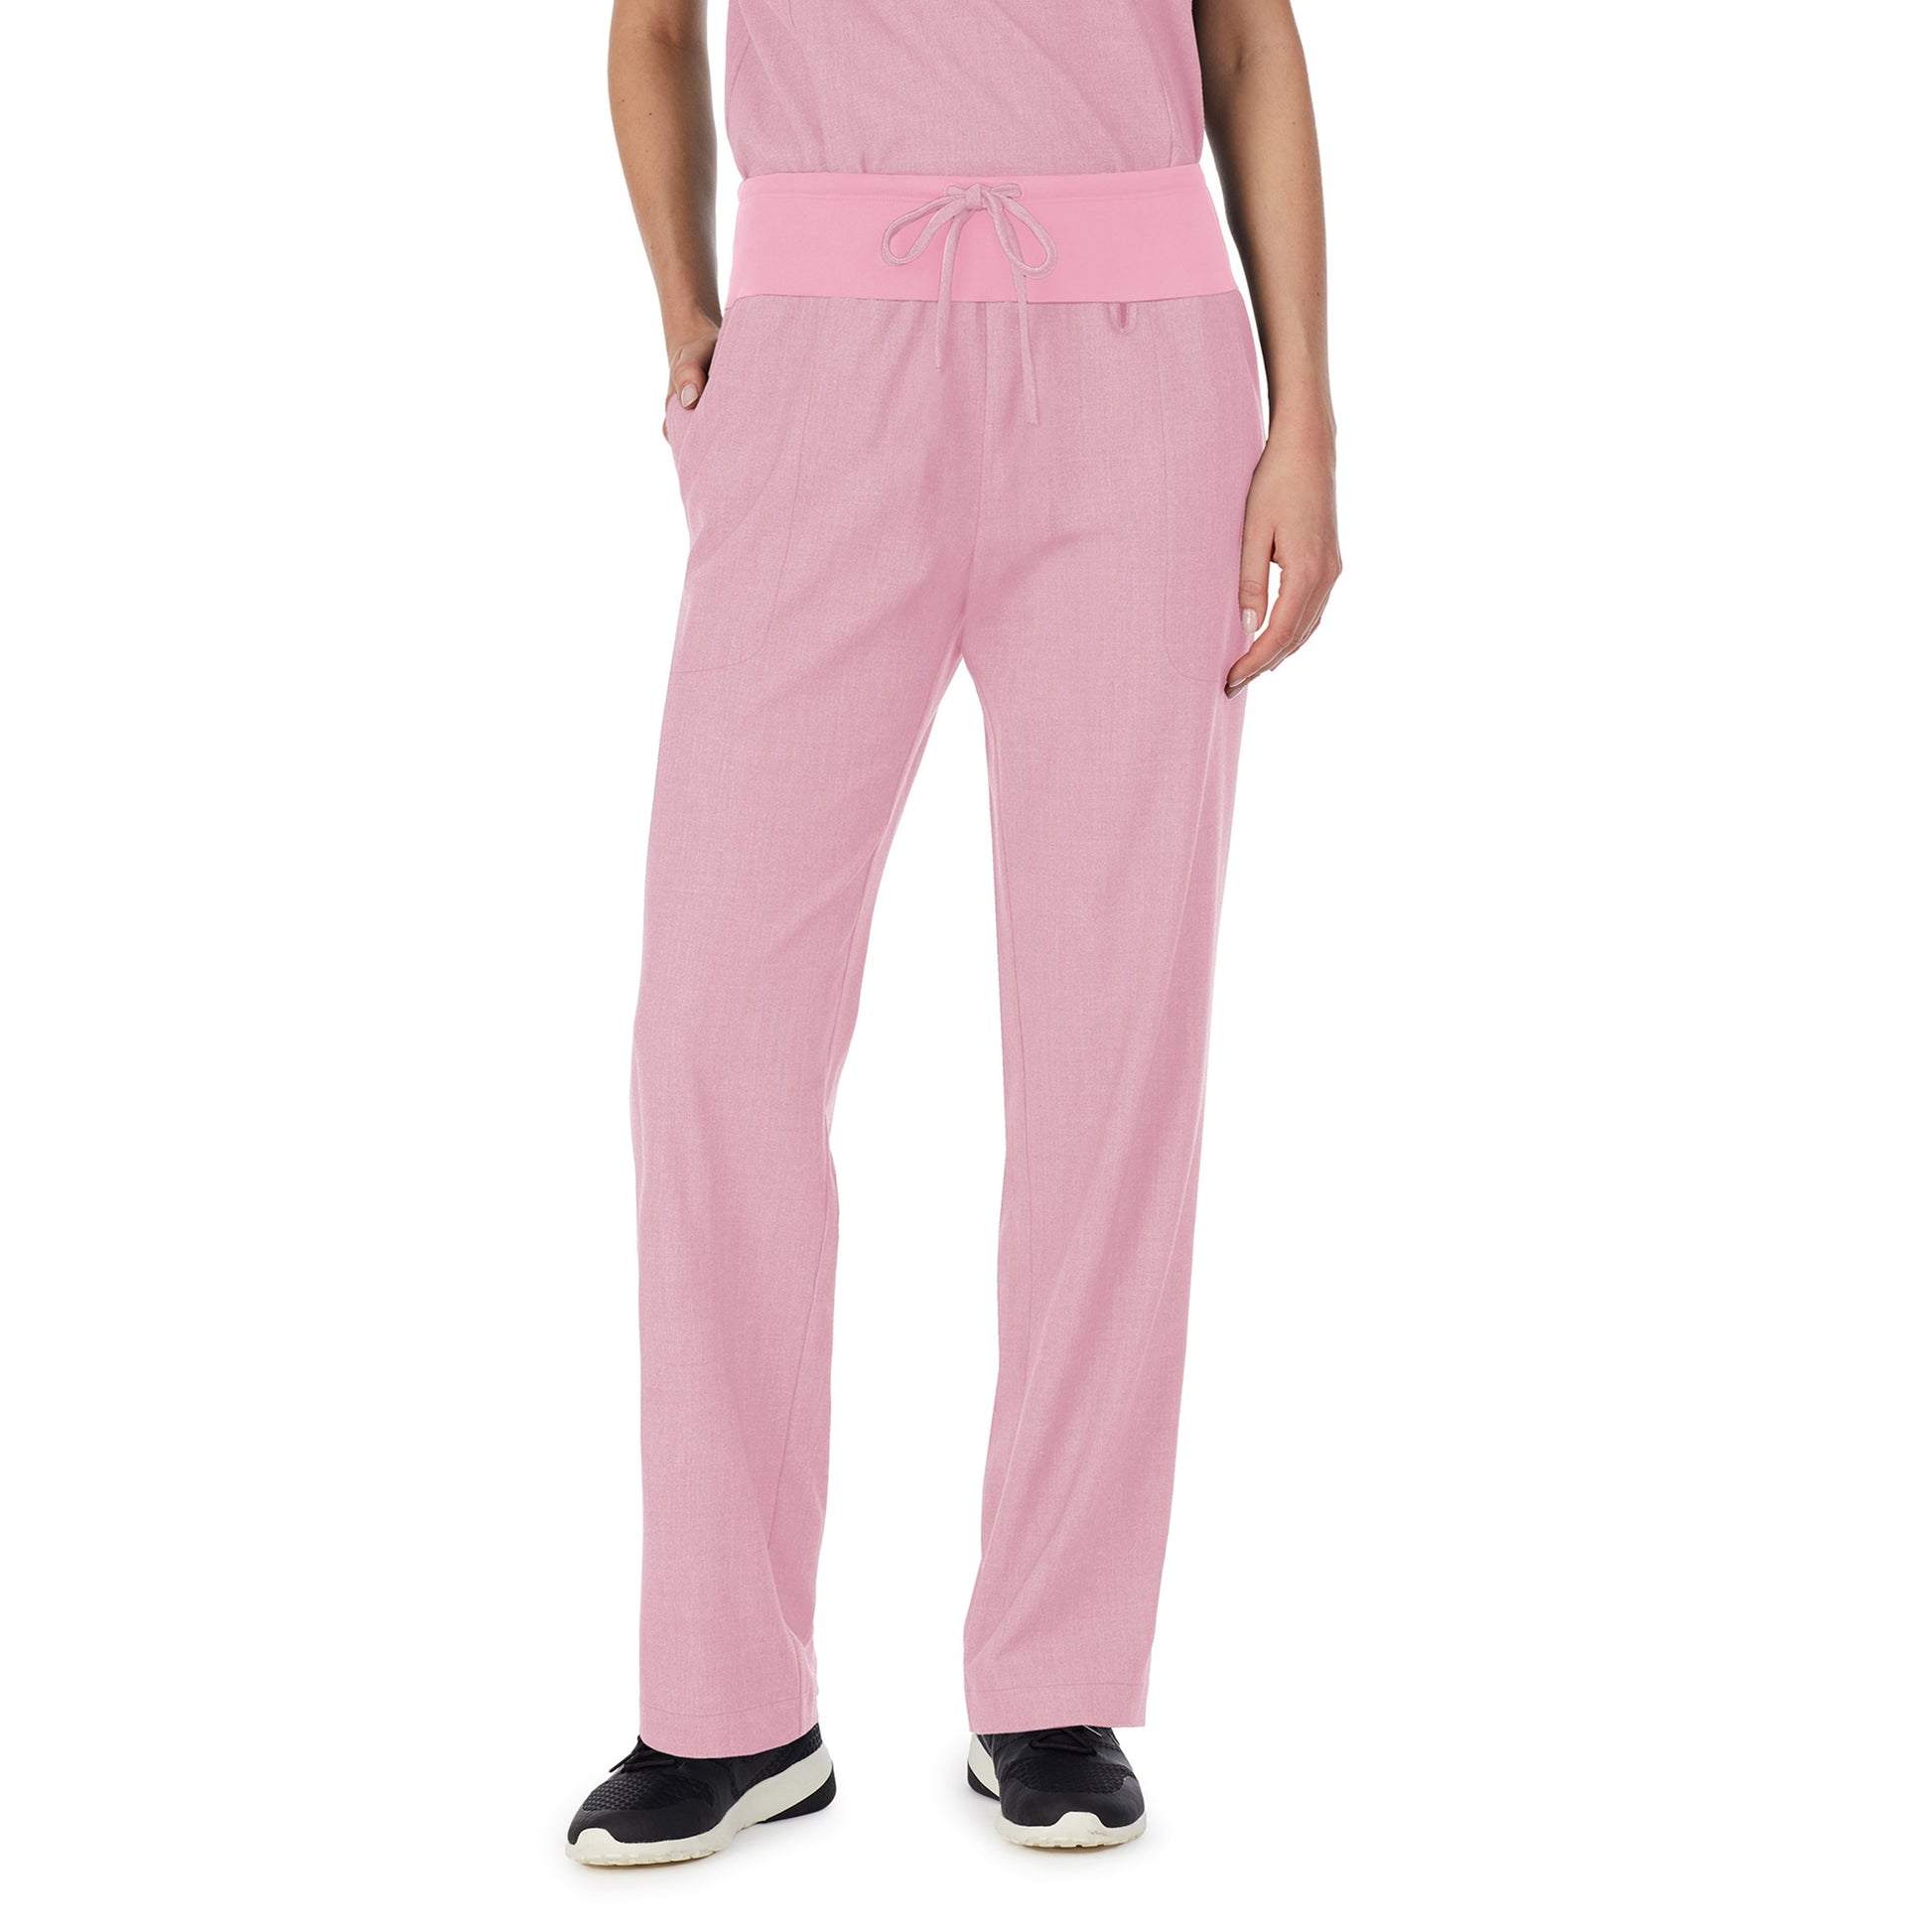 Cameo Pink Heather;@A lady wearing pink cameo heather scrub classic pant petite.